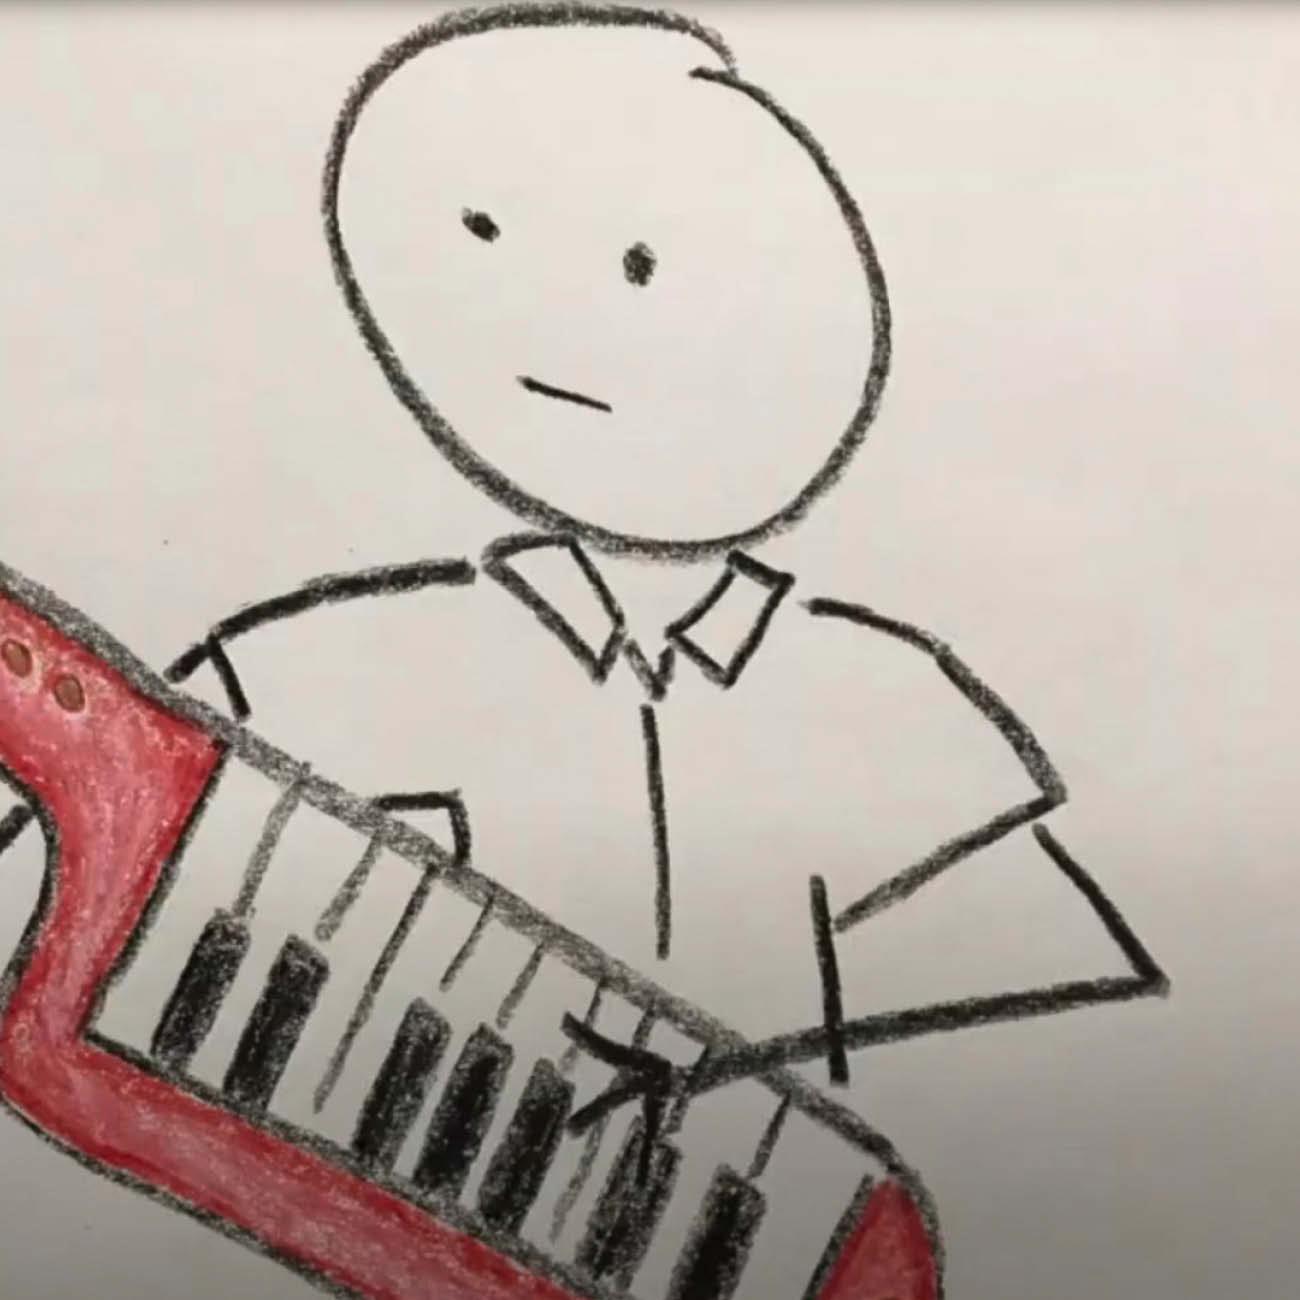 Drawing of a stick figure holding a keytar